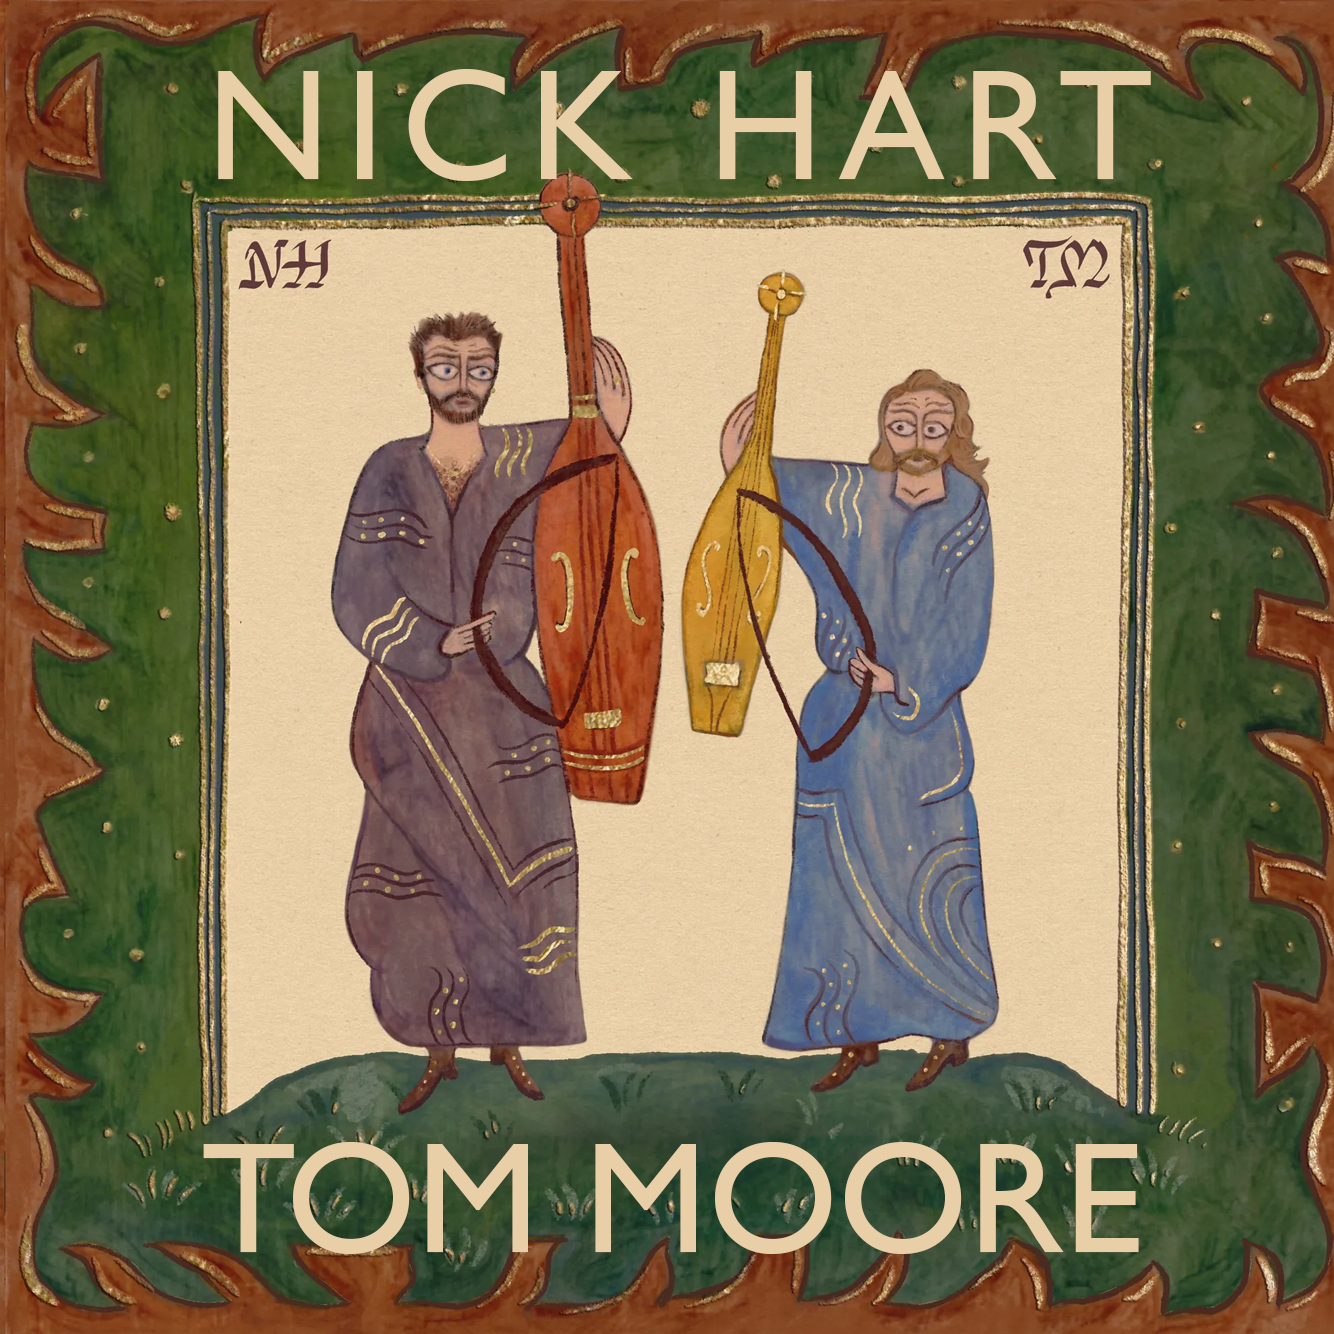 Nick Hart and Tom Moore